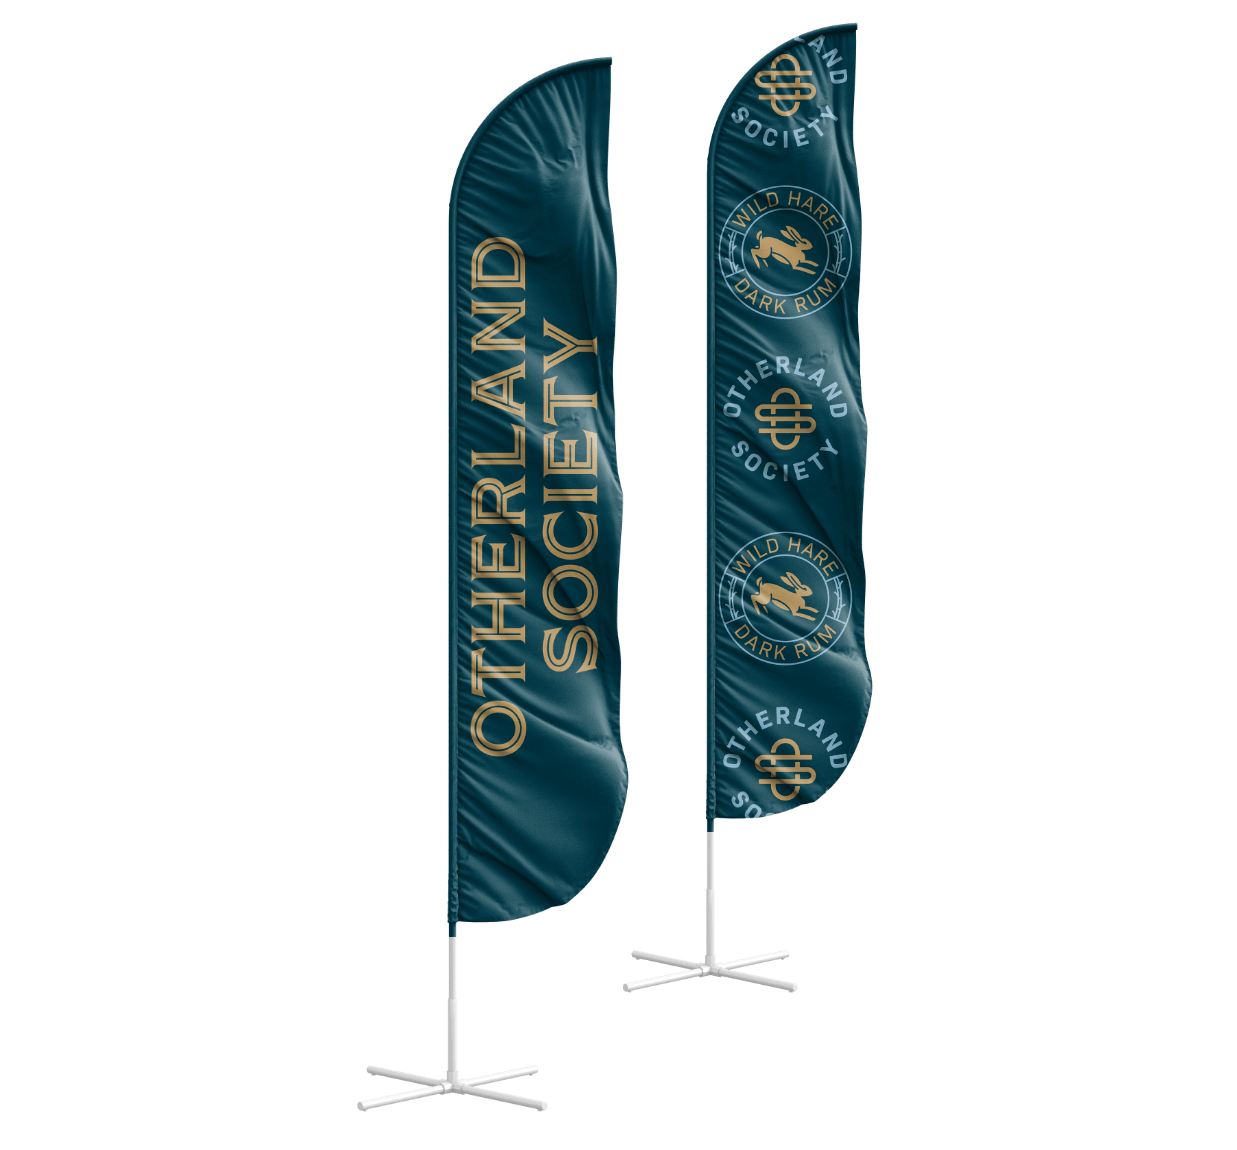 Otherland Society feather flags. One has the Otherland Society wordmark logo in gold, the other alternates the circular logo crest and the Wild Hare Dark rum crest